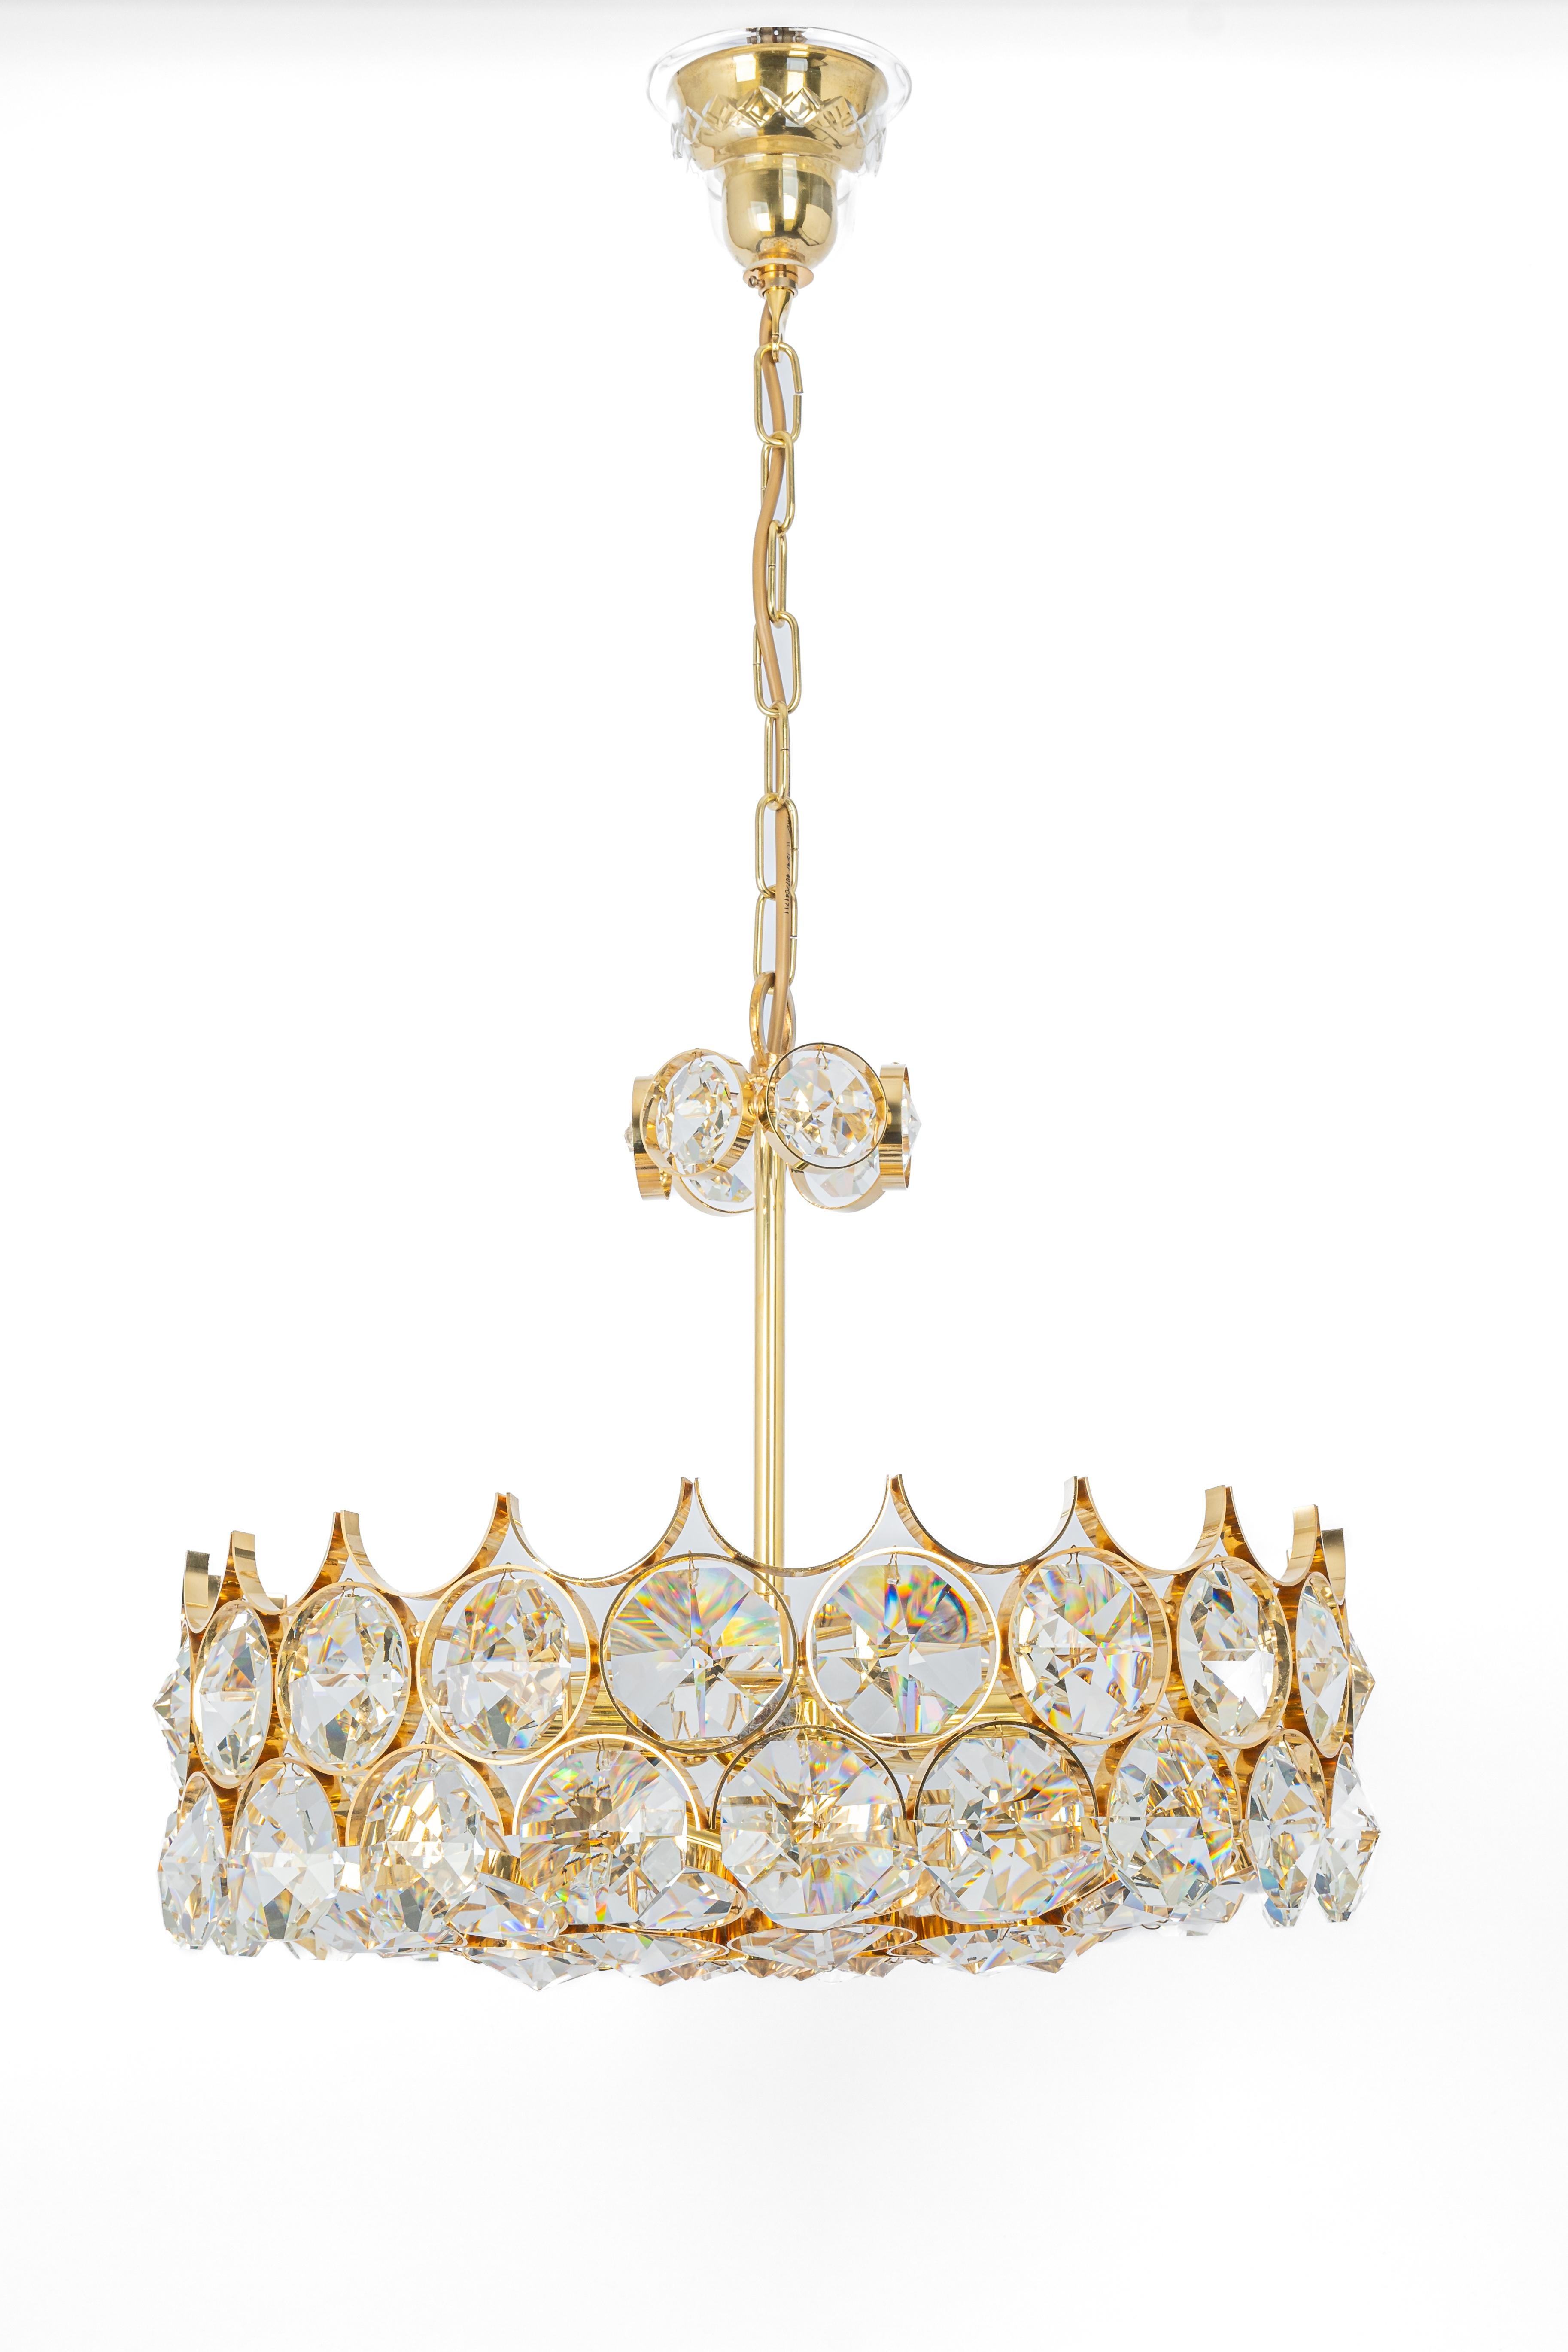 Gold Plate 1 of 4 Large Gilt Brass Chandelier, Sciolari Design by Palwa, Germany, 1970s For Sale